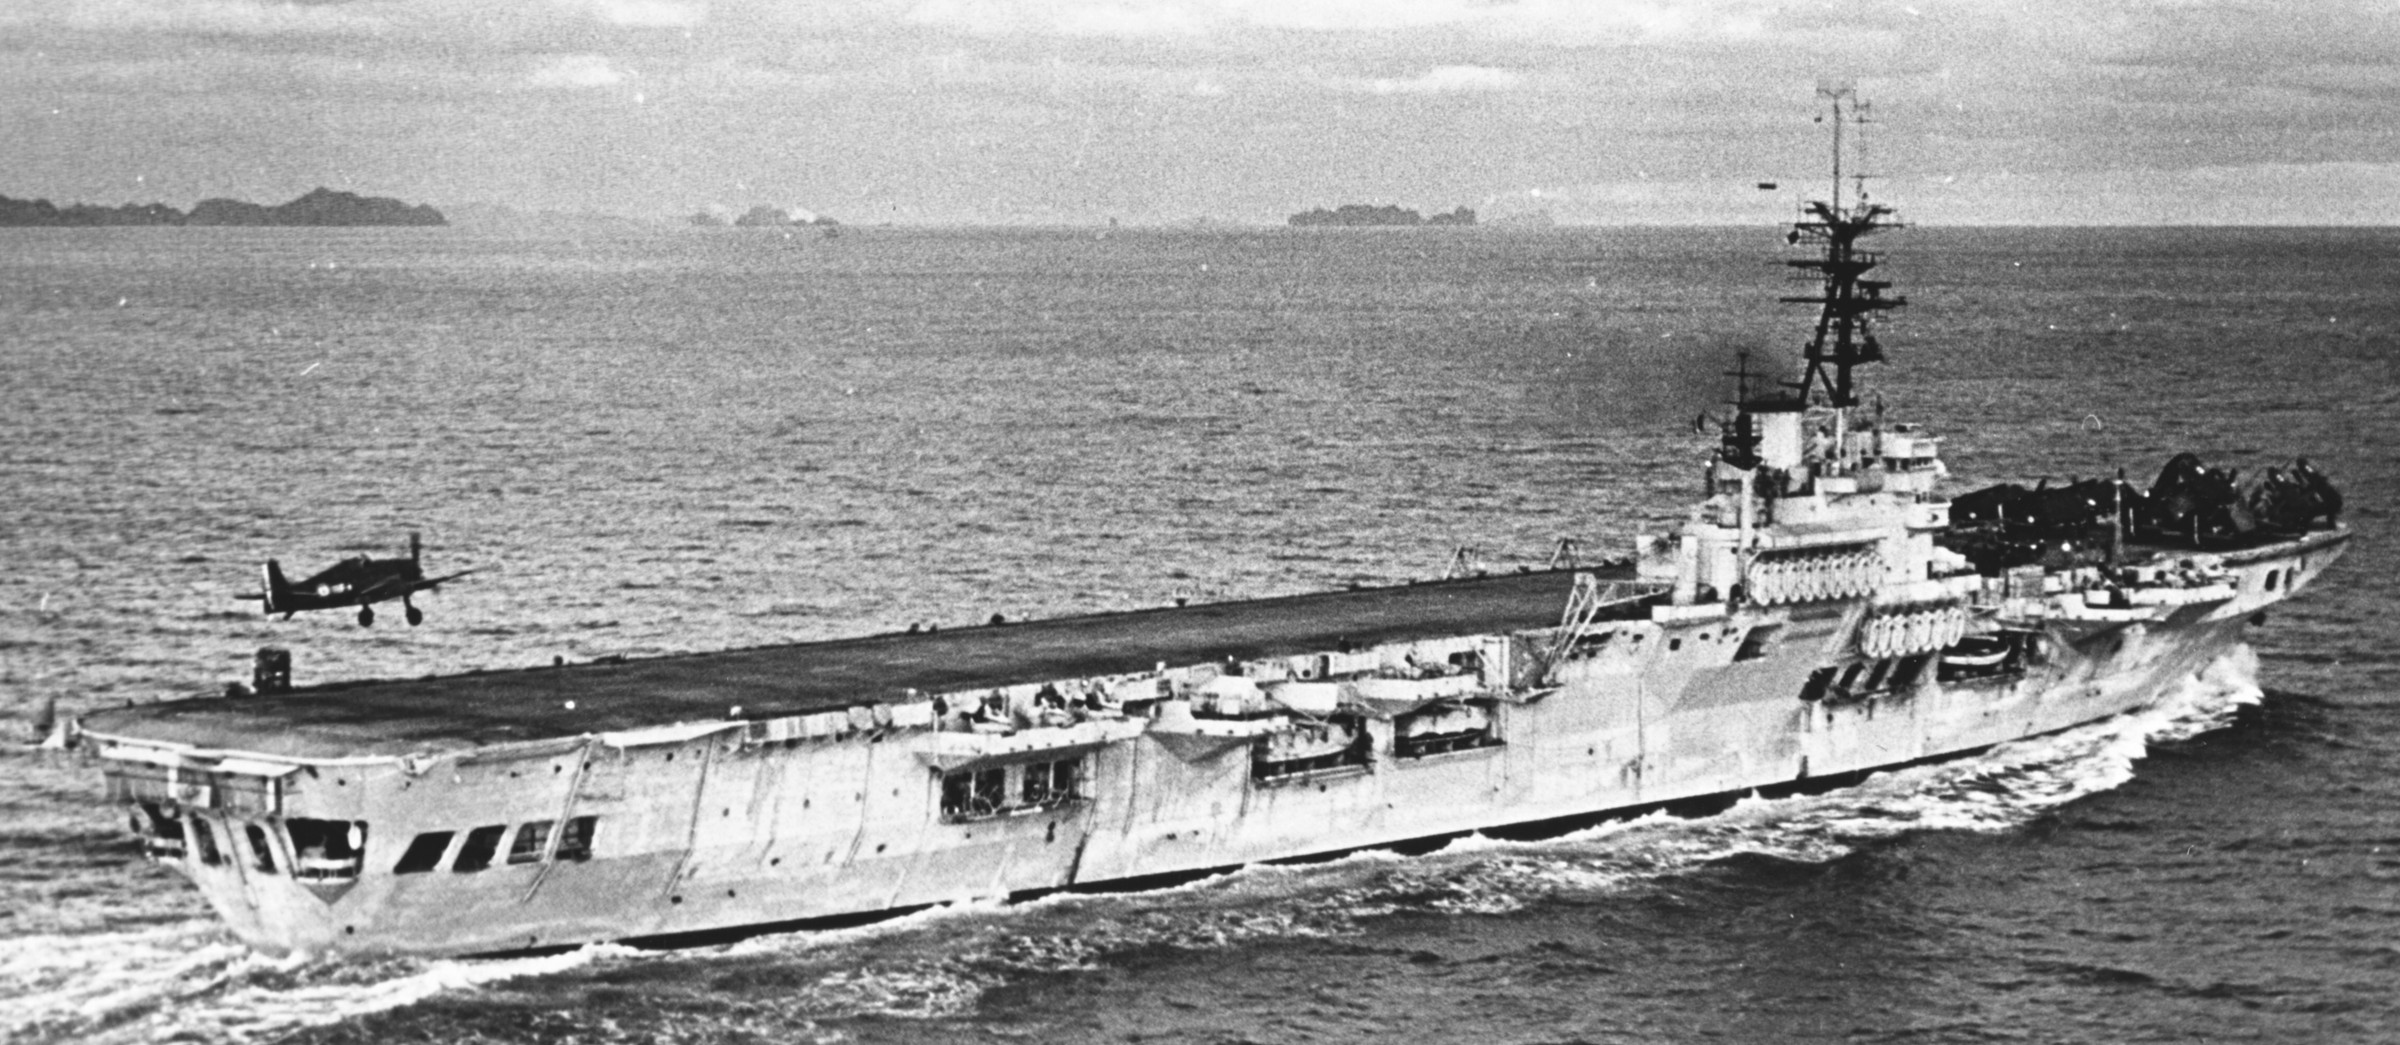 r-95 fs arromanches colossus class aircraft carrier french navy r15 hms colossus